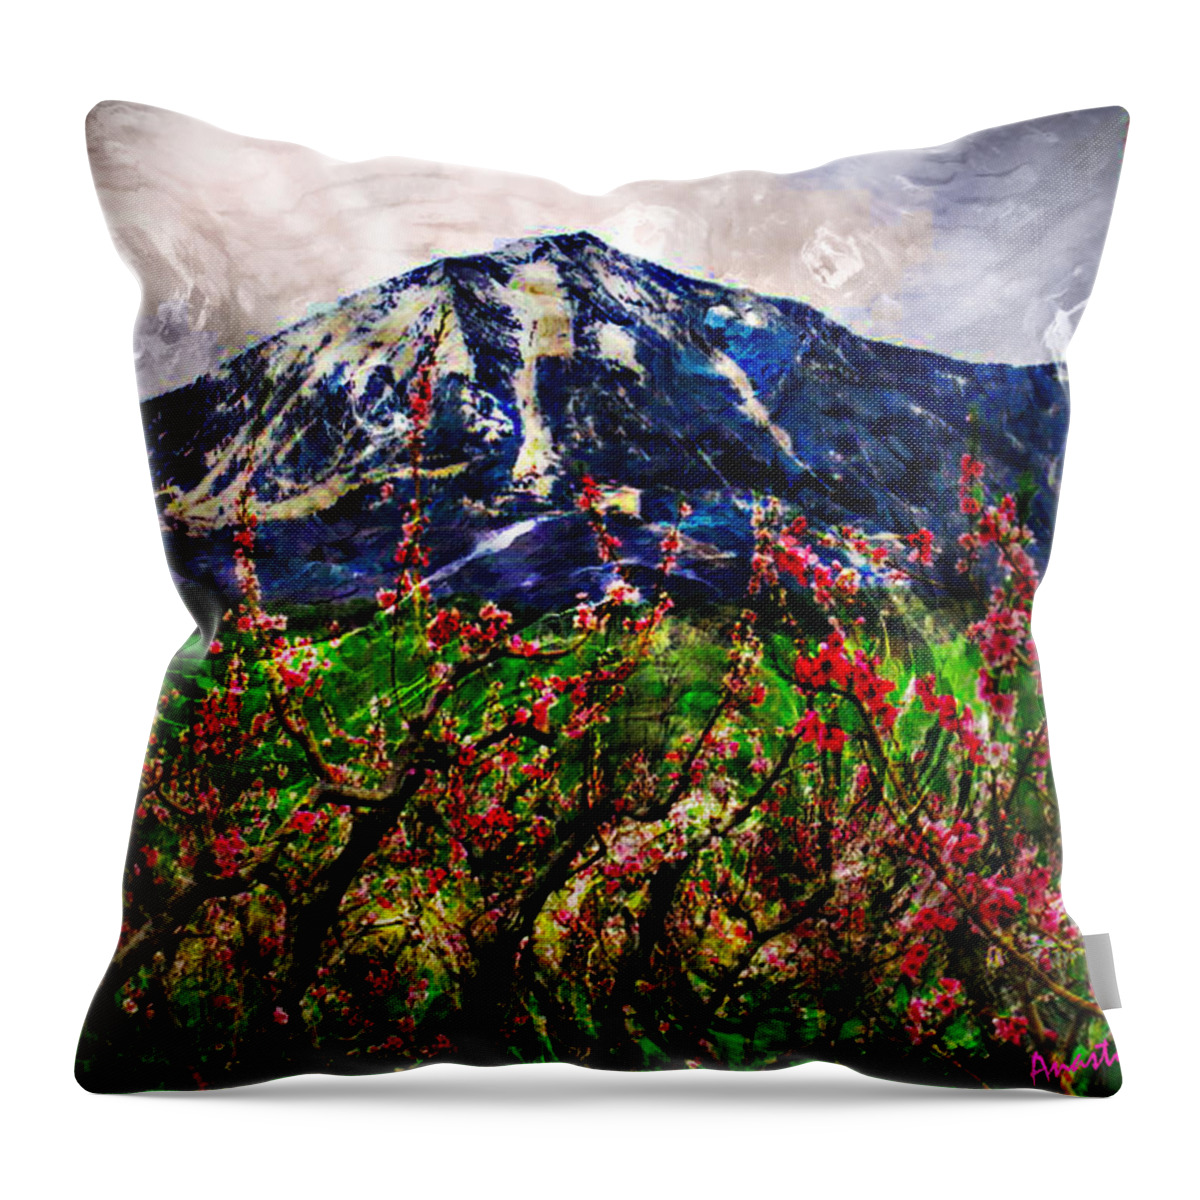 Peach Blossoms Throw Pillow featuring the photograph Paonia Peach Blossoms and Mount Lamborn by Anastasia Savage Ealy